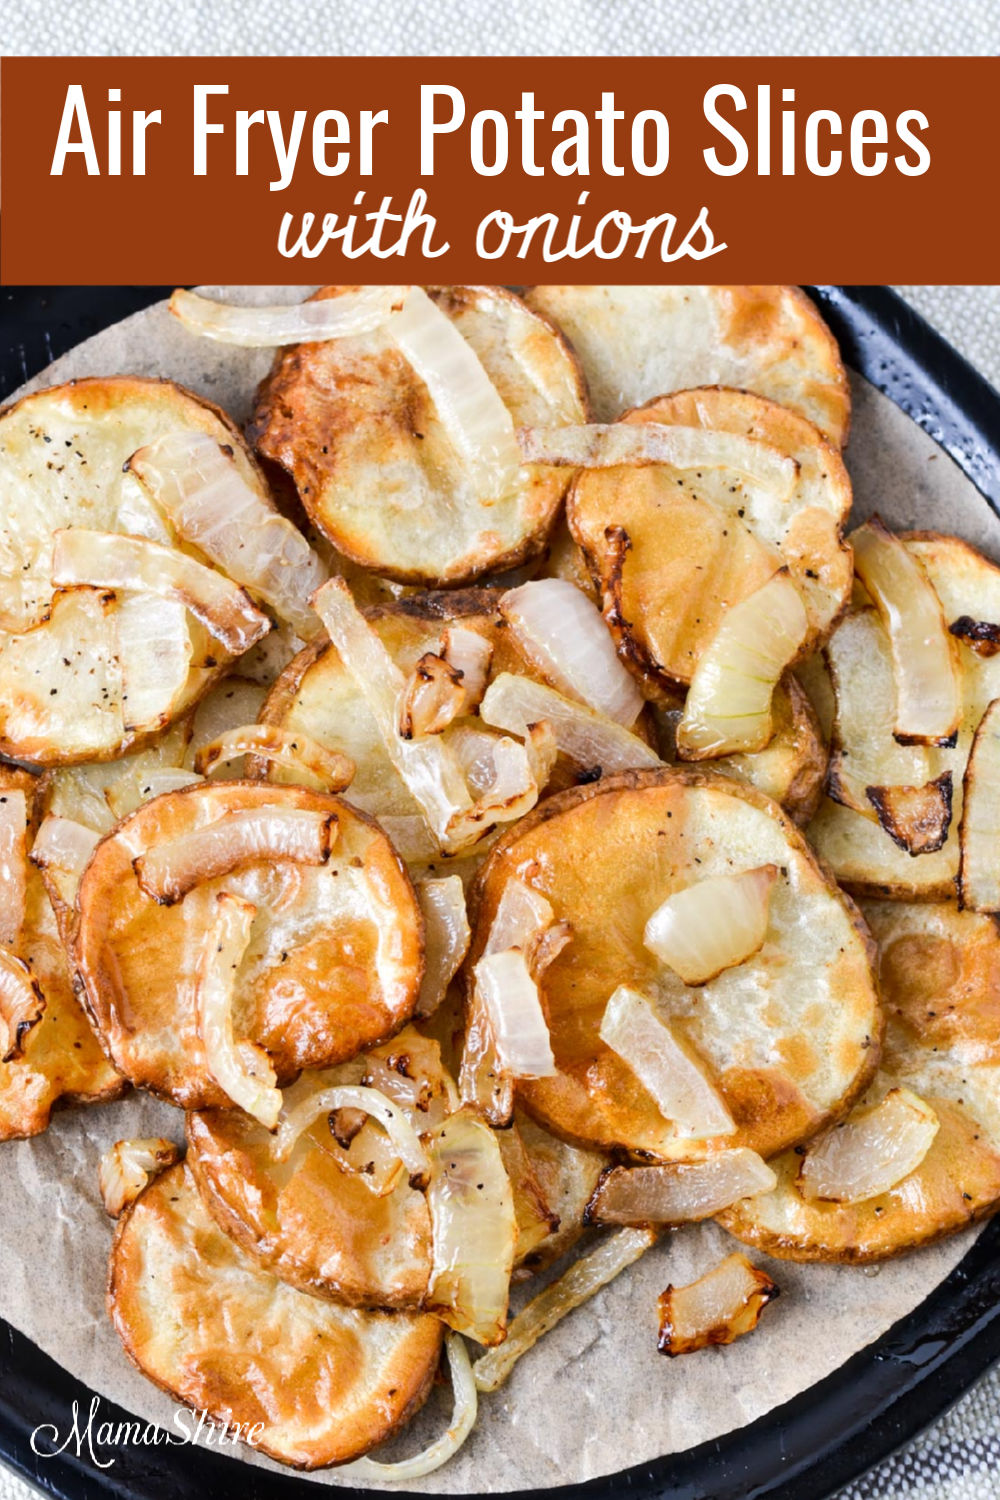 Air Fryer Fried Potatoes with onions.